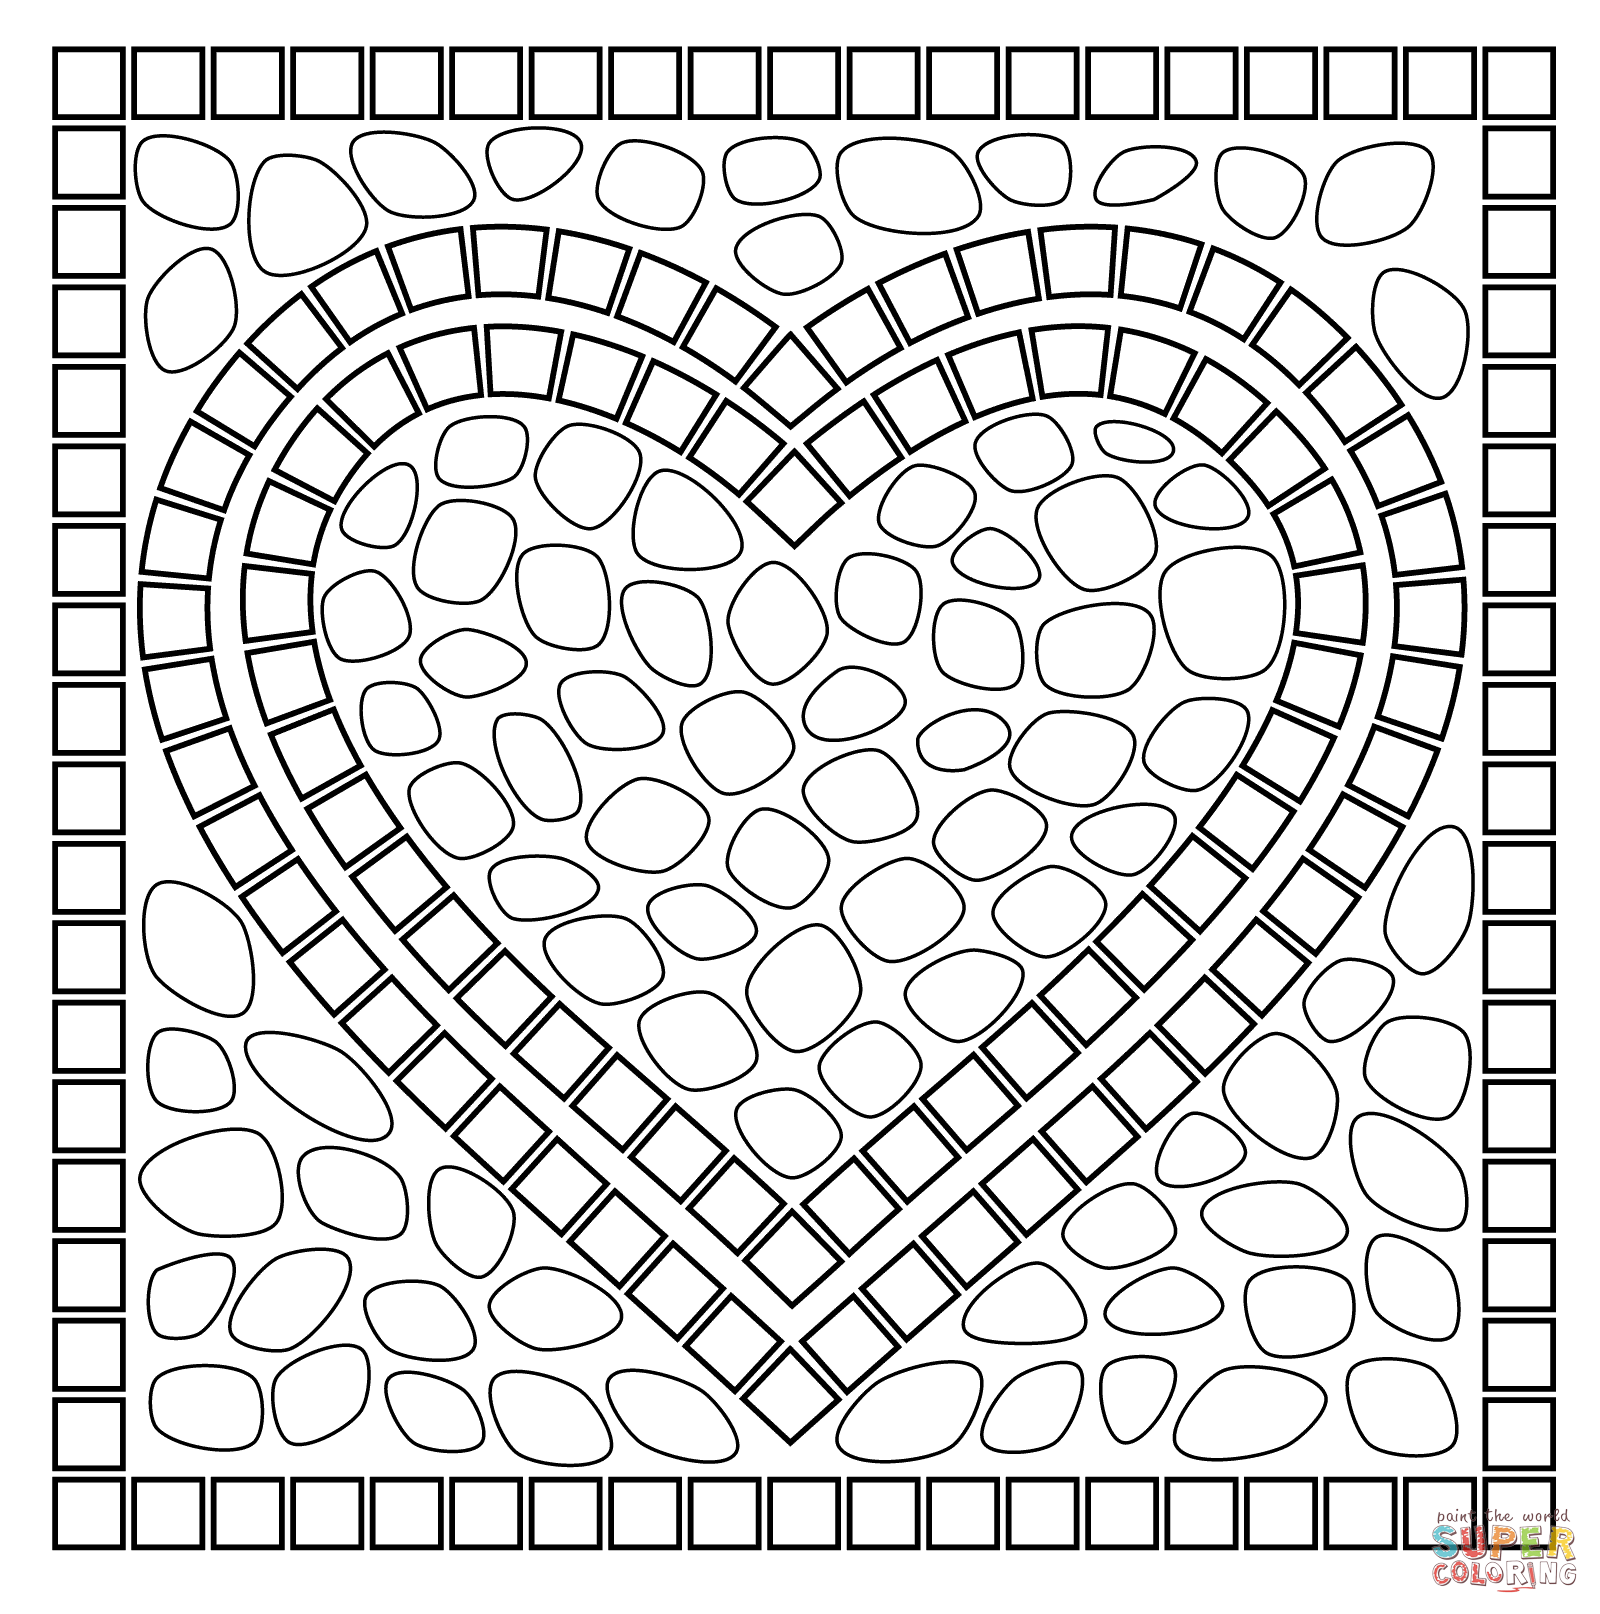 Free Roman Mosaic Coloring Pages, Download Free Clip Art, Free Clip Art on  Clipart Library